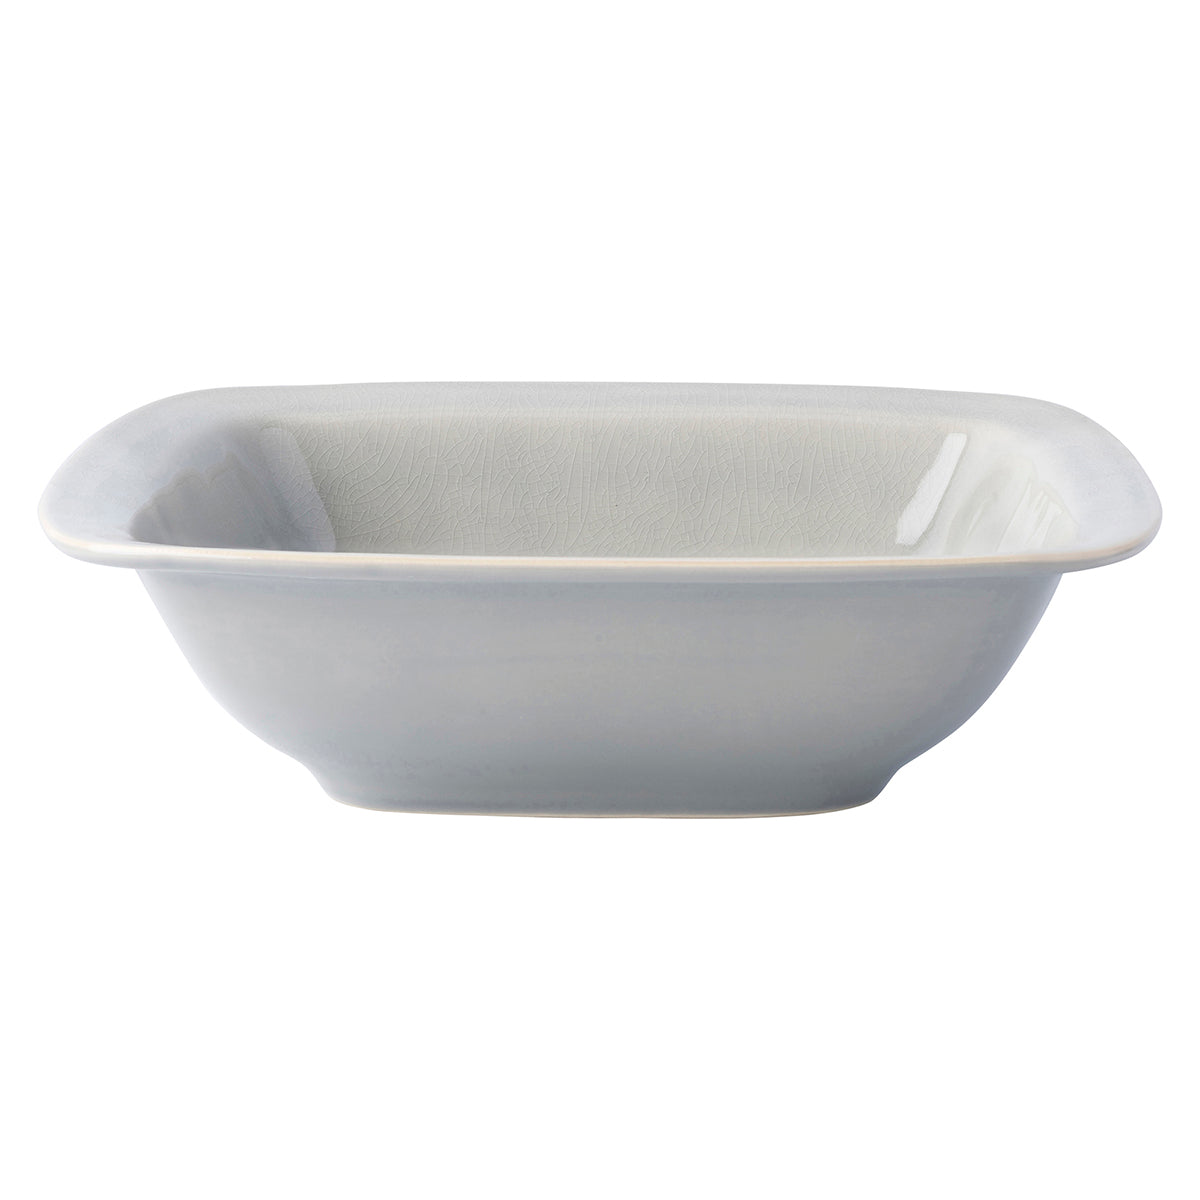 Puro 12in Rounded Square Serving Bowl - Mist Grey-1st